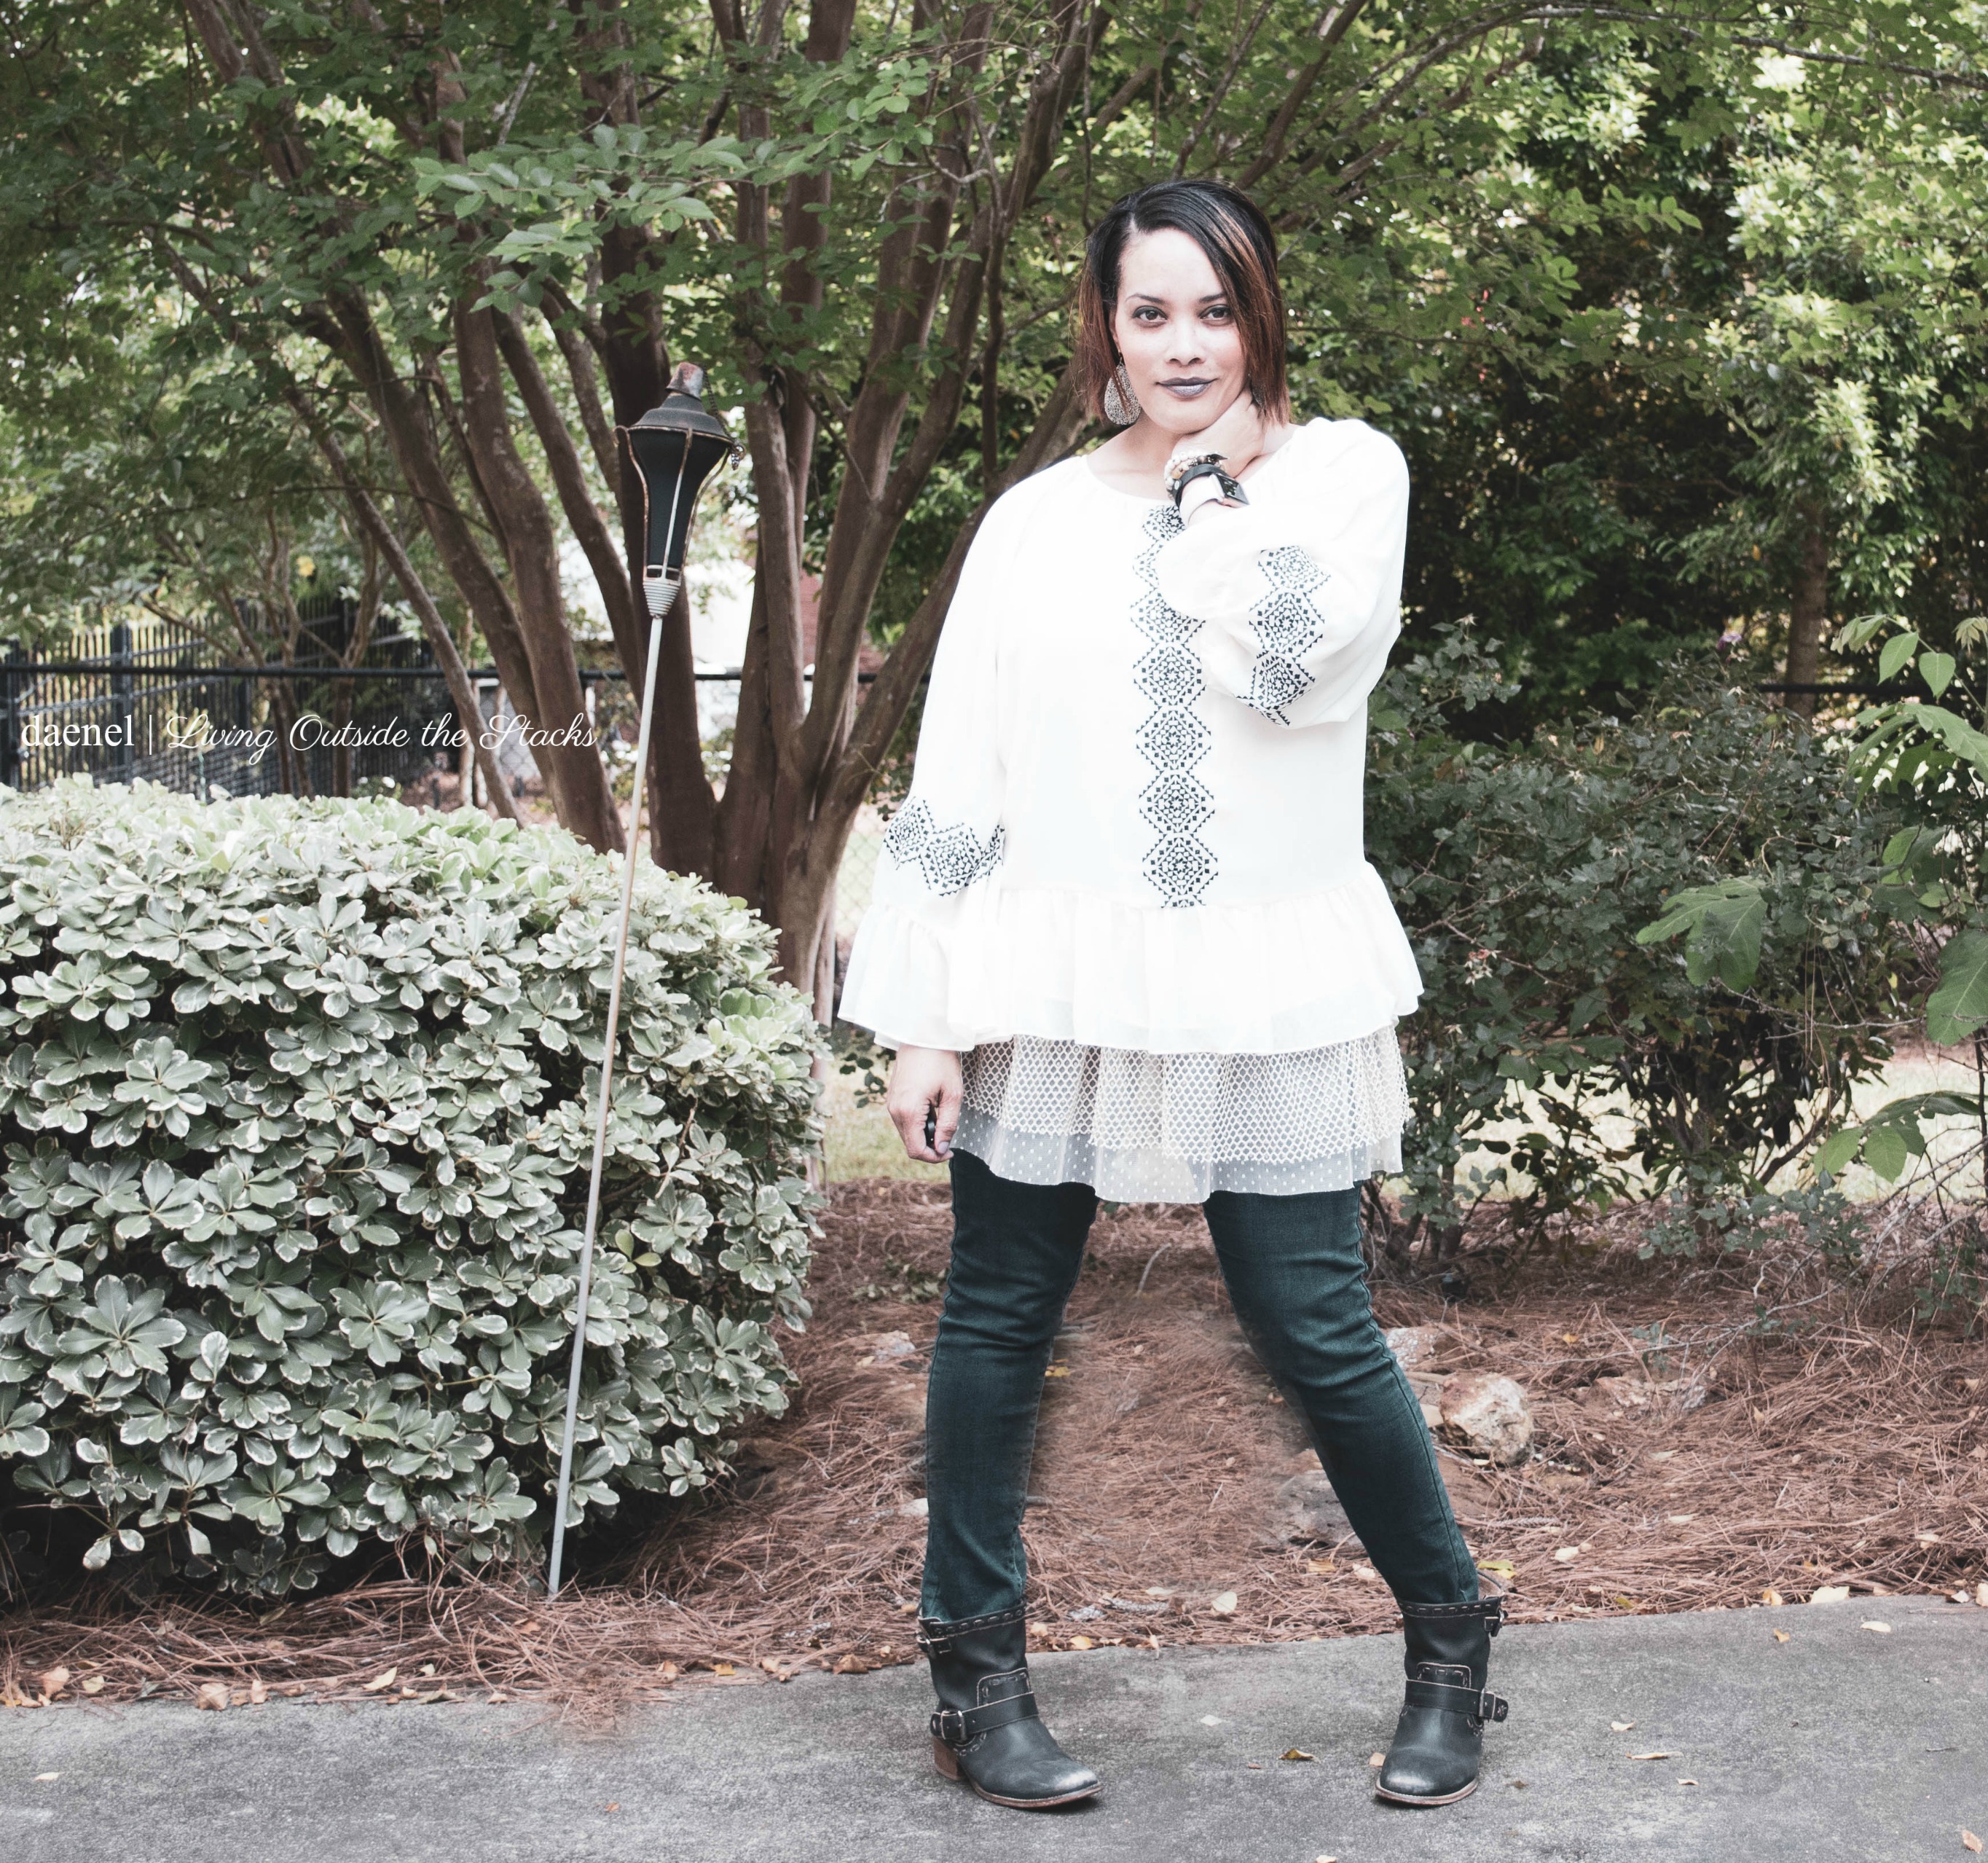  Aztec Print Blouse Jeggings and Boots {living outside the stacks}